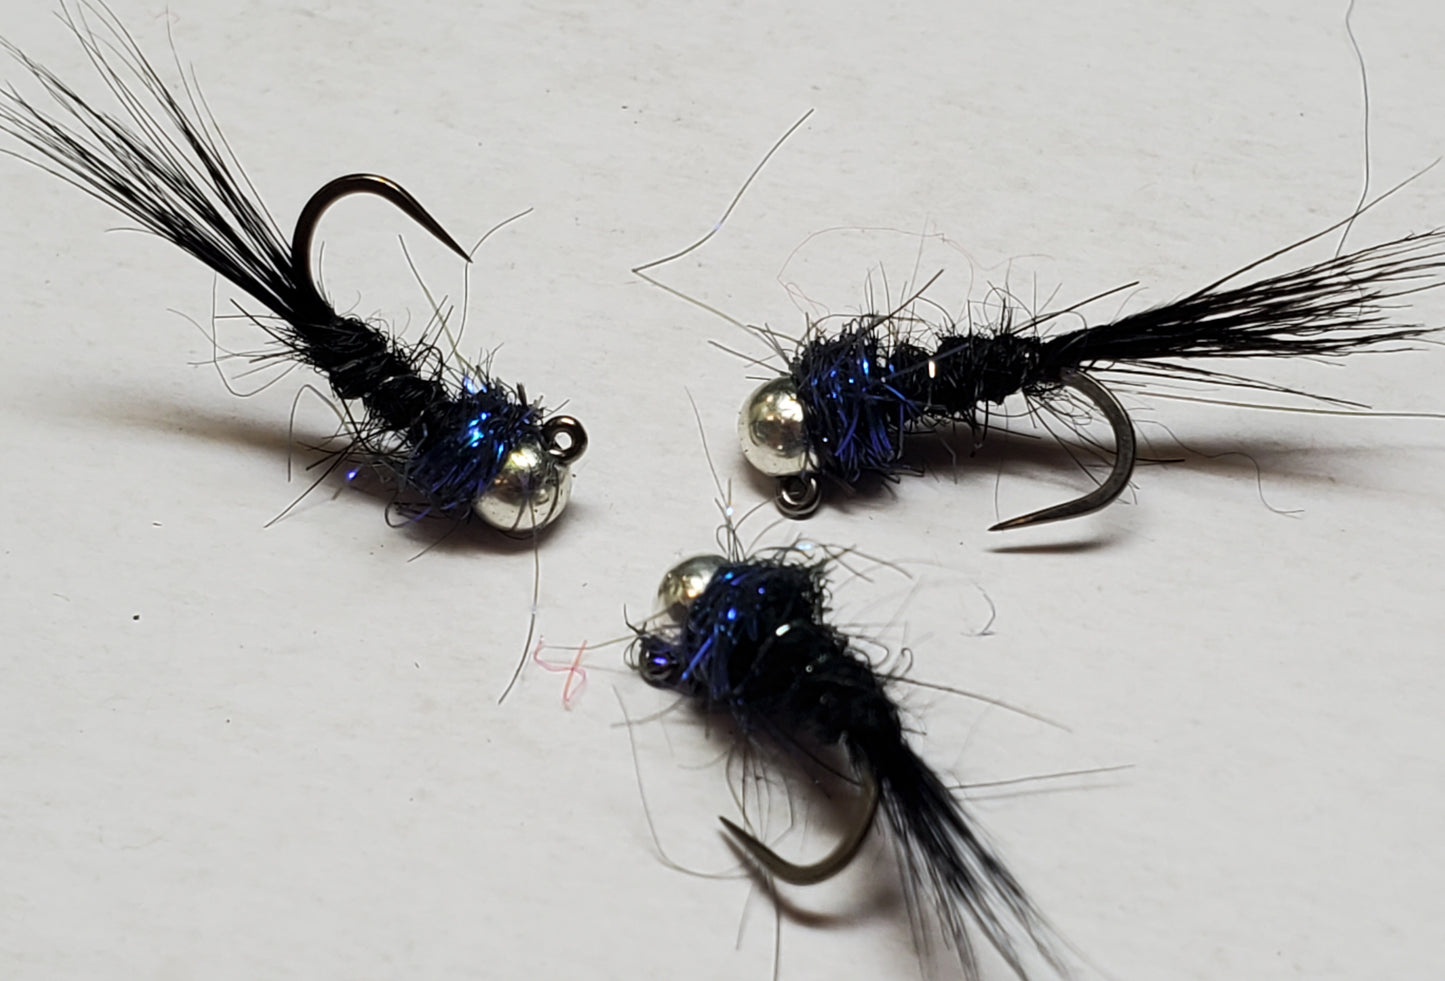 Trout Jig, Tungsten Bead Head Trout Jig, Trout Jig Nymph, Bead Head Nymph, Trout Jig Black and Blue Stonefly